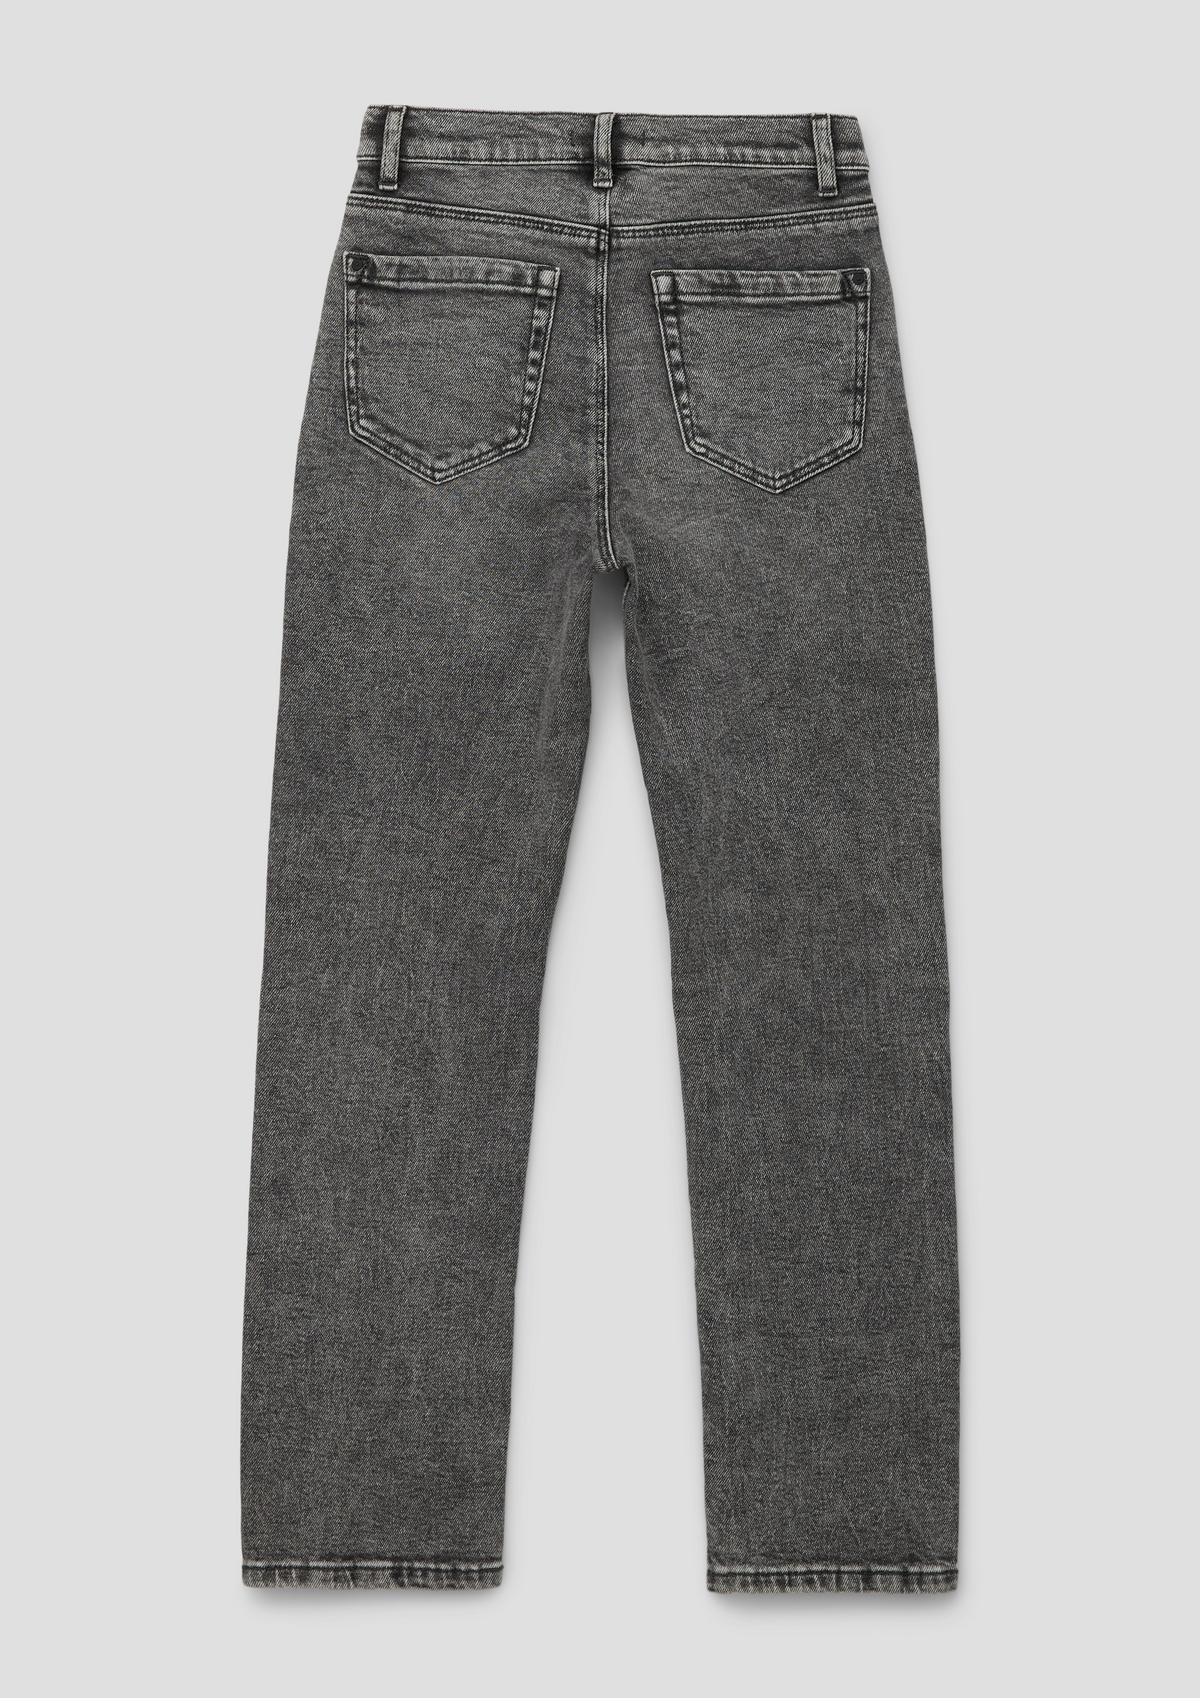 s.Oliver Jeans / relaxed fit / high rise / straight leg